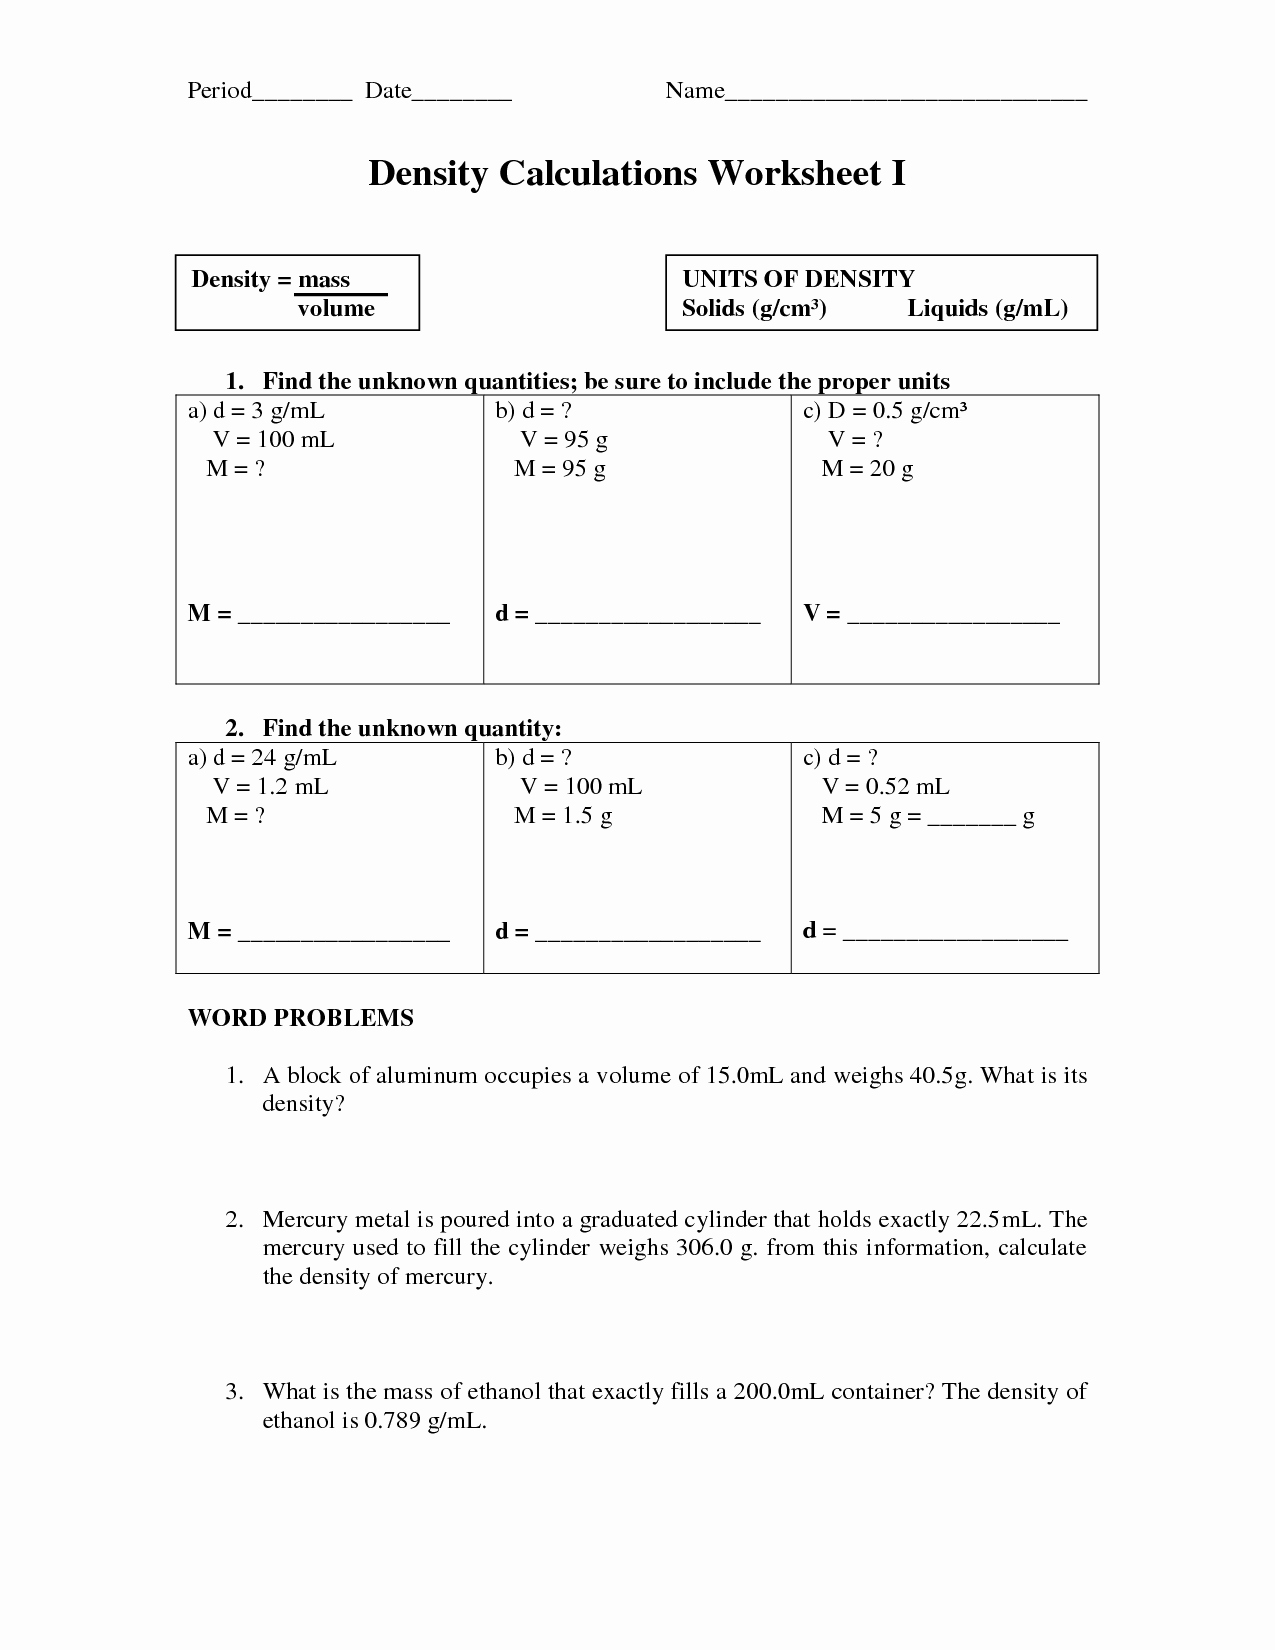 Density Problems Worksheet with Answers Unique Density Worksheet 1 Answers